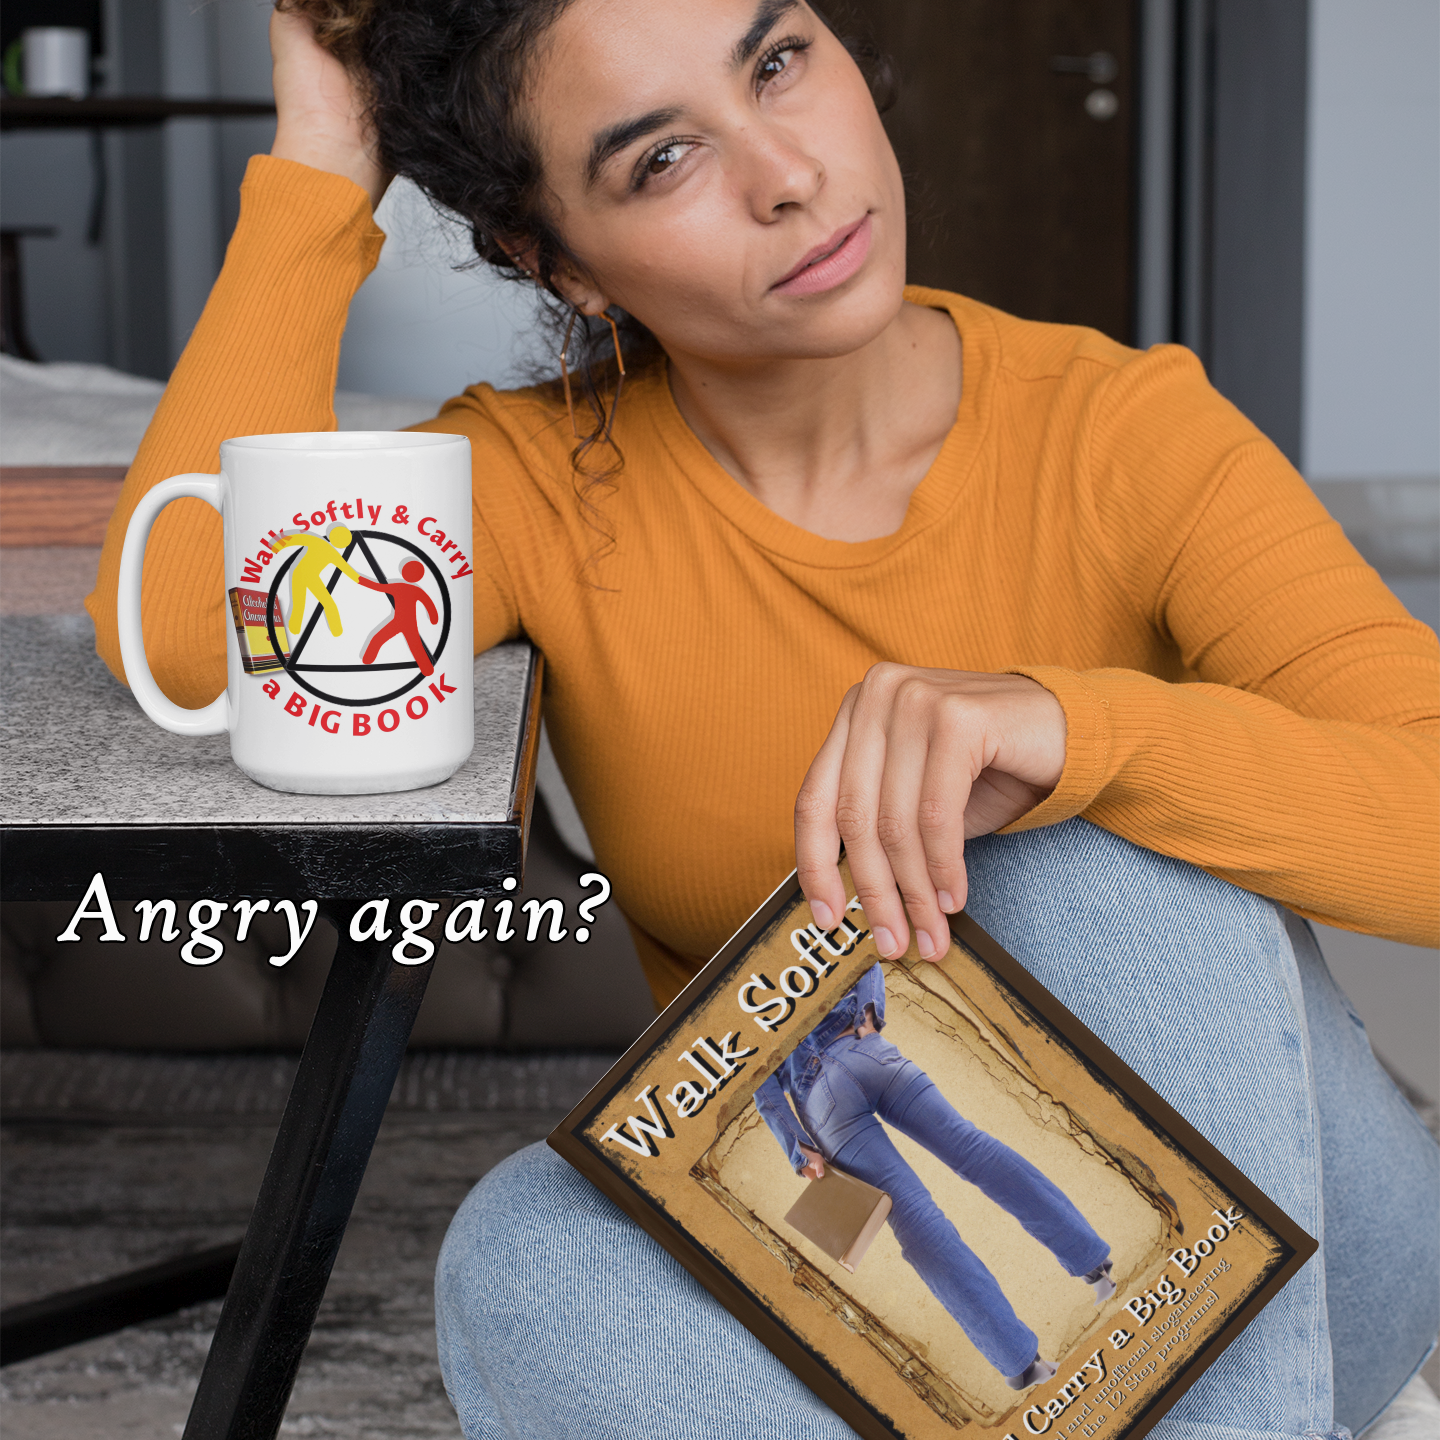 Learn about anger in the book Walk Softly & Carry a Big Book